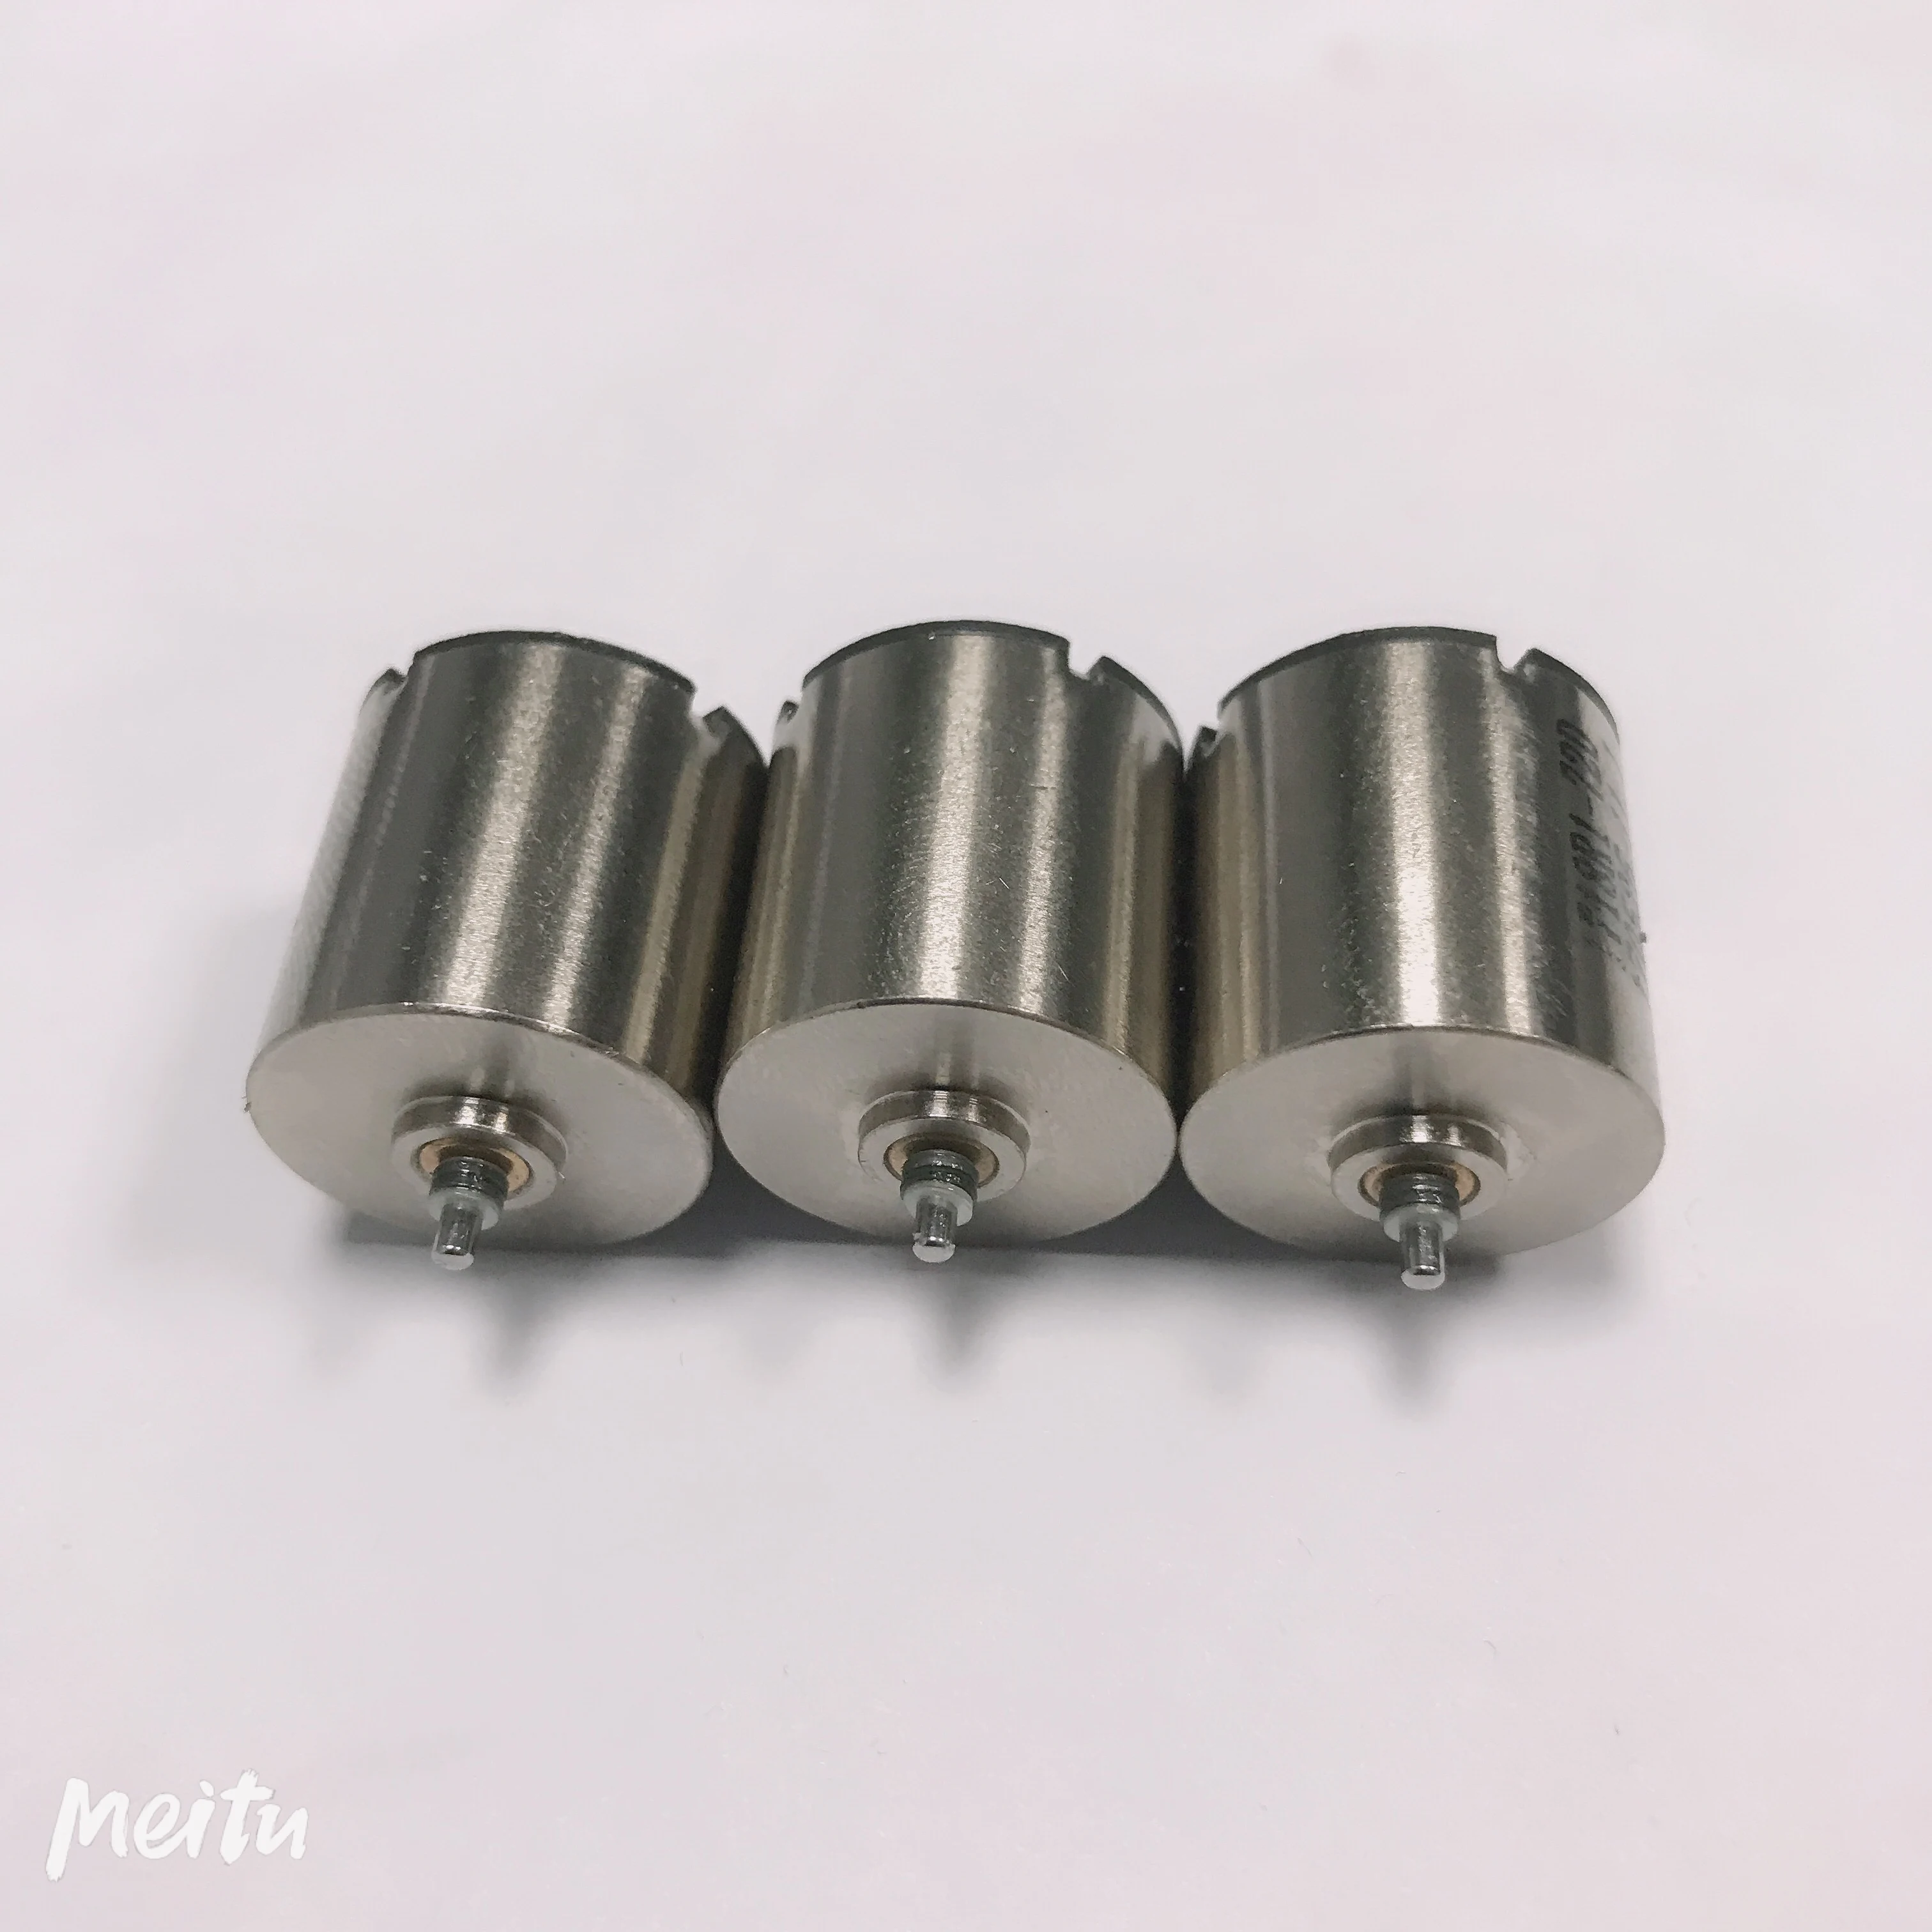 DC 12V 19800RPM High Speed Strong Magnetic 5-Pole Rotor 17mm Coreless Mini Motor 